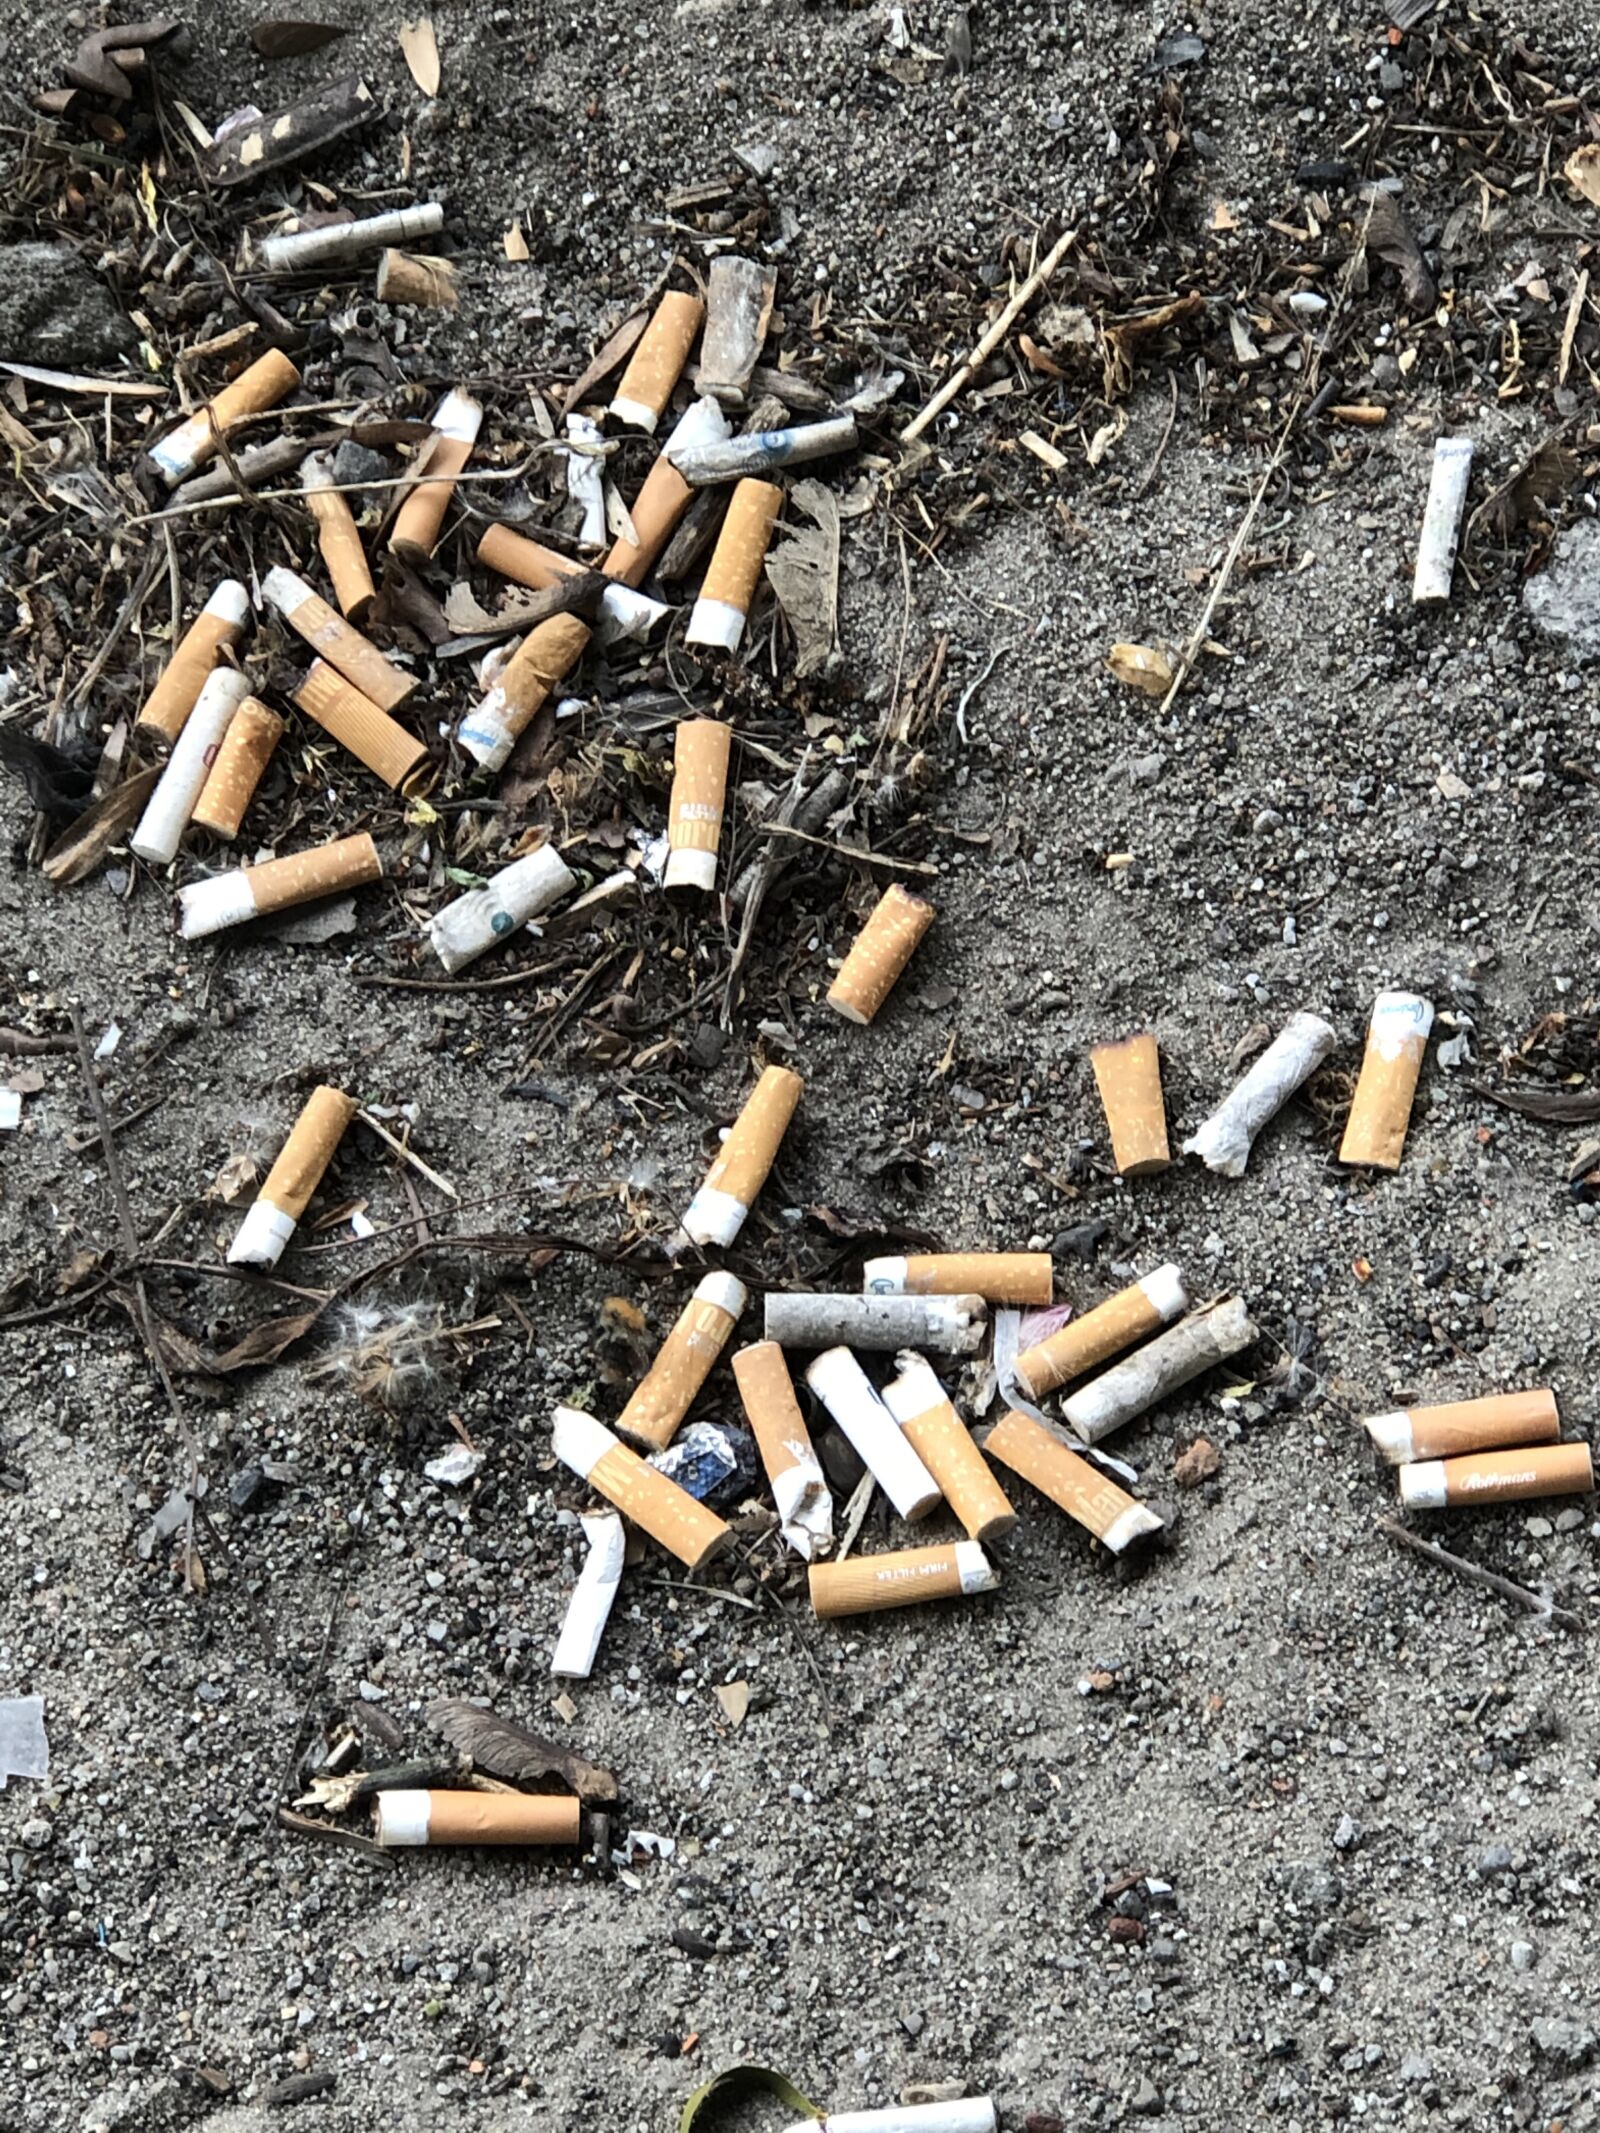 Apple iPhone 8 Plus + iPhone 8 Plus back dual camera 6.6mm f/2.8 sample photo. Cigarettes, garbage, ecology photography